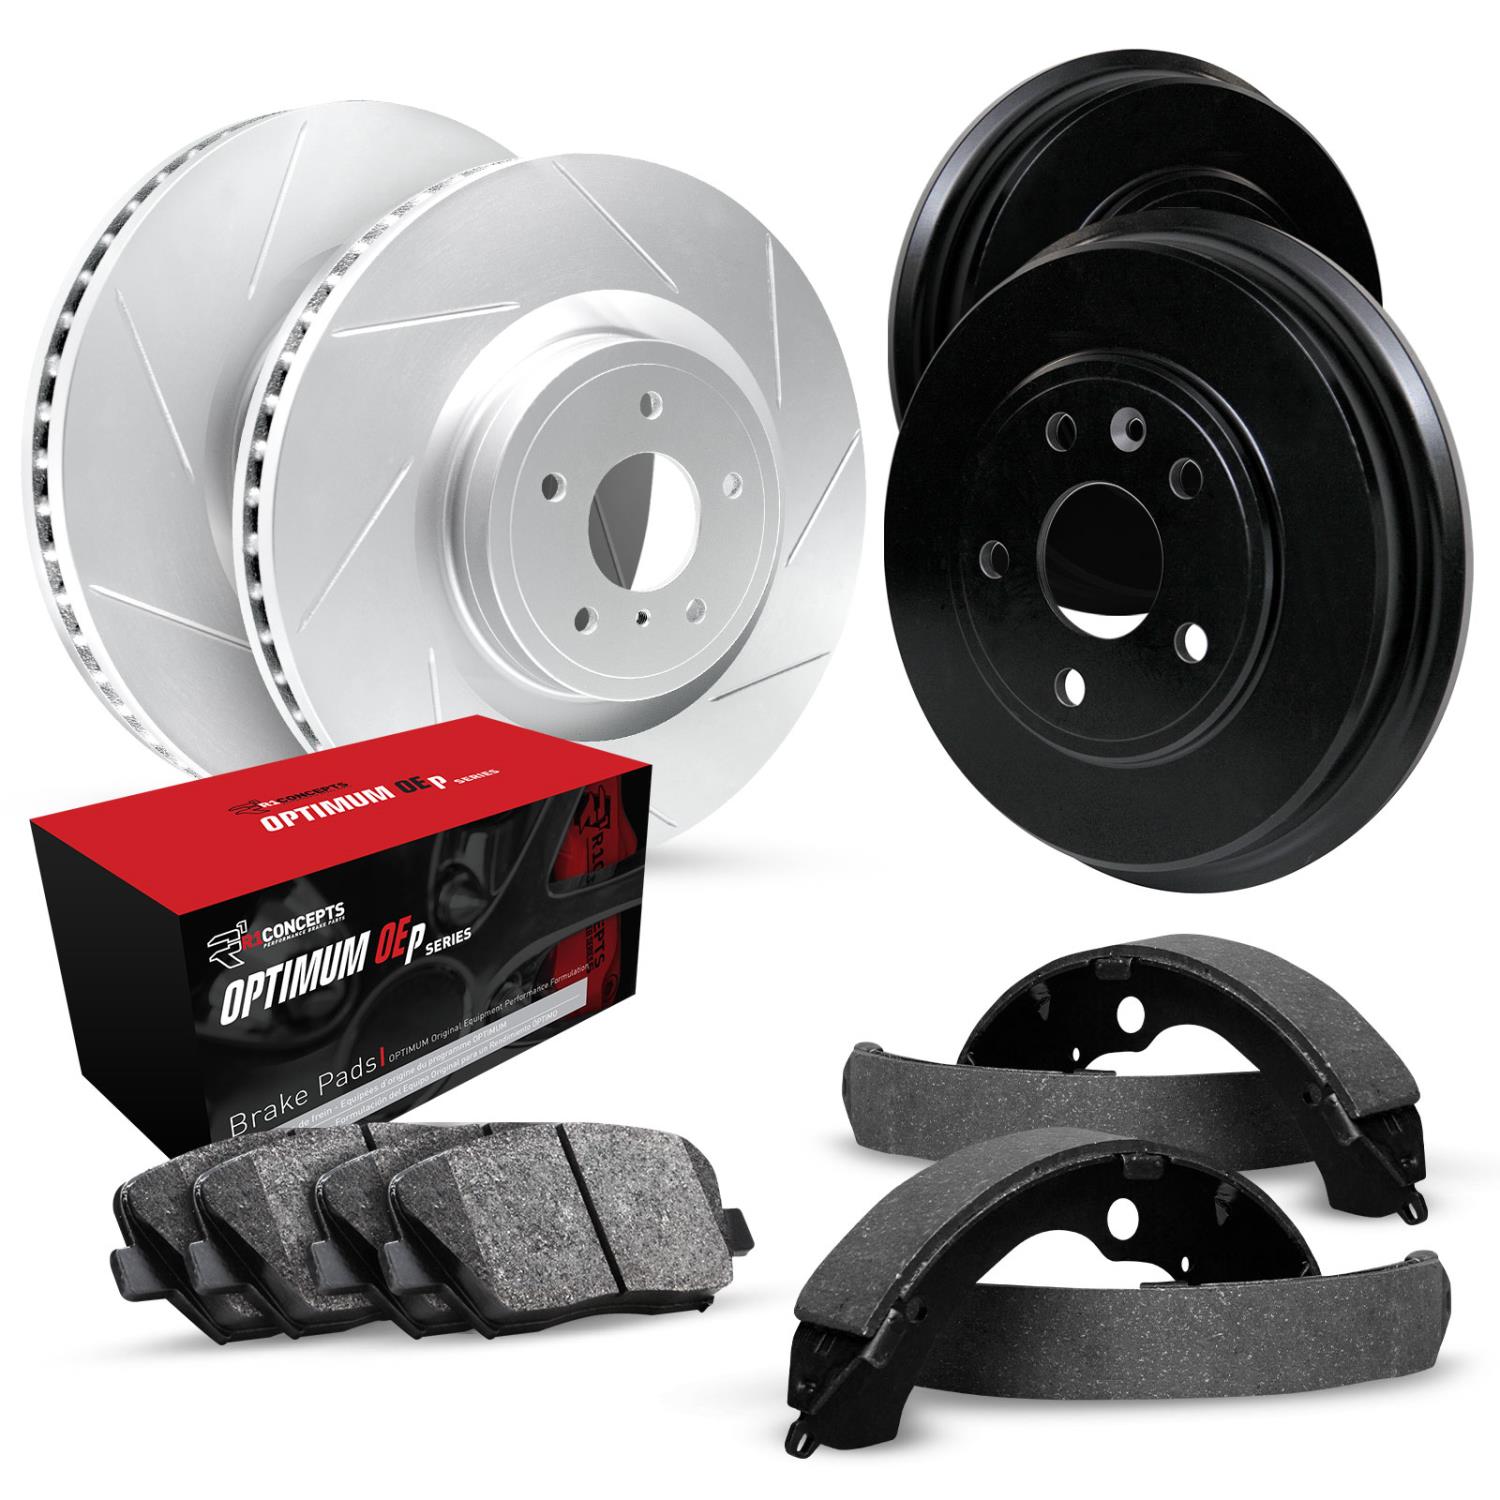 GEO-Carbon Slotted Brake Rotor & Drum Set w/Optimum OE Pads & Shoes, 1996-2000 Lexus/Toyota/Scion, Position: Front & Rear